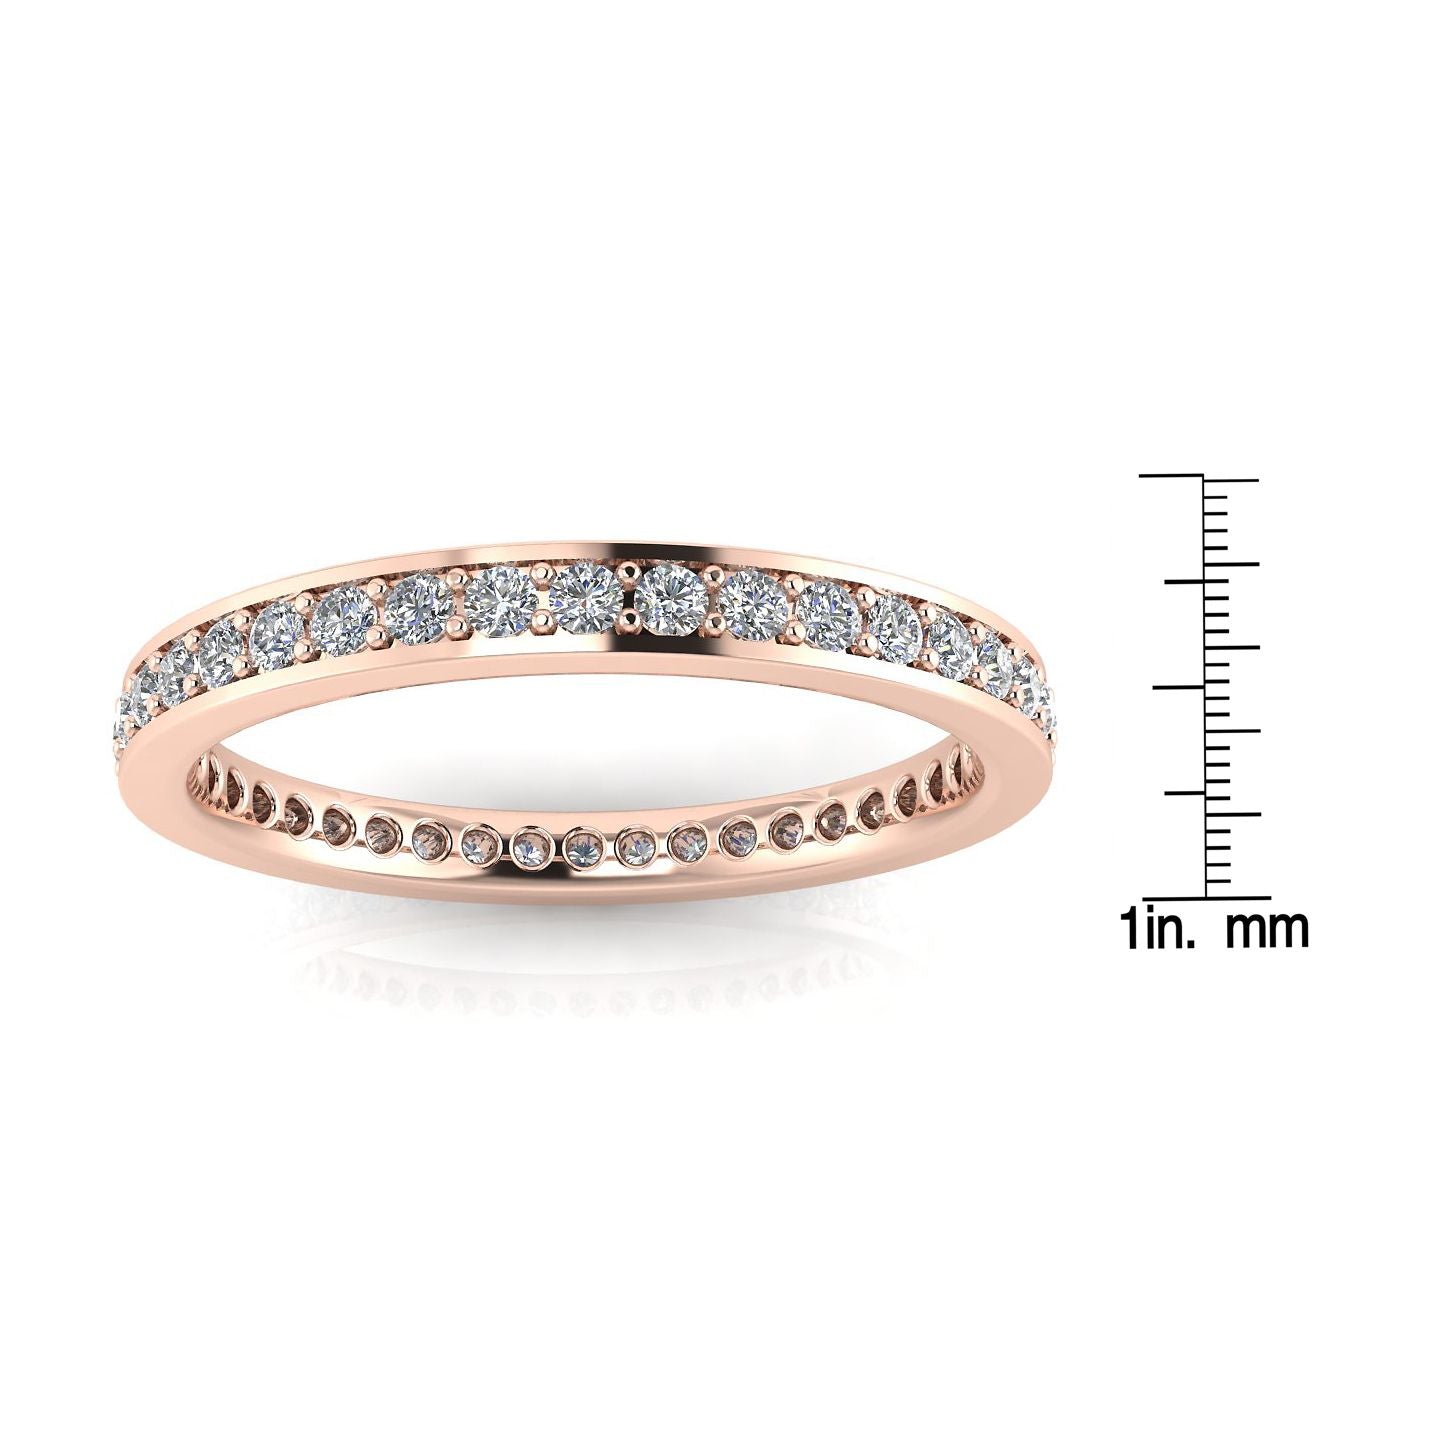 Round Brilliant Cut Diamond Channel Pave Set Eternity Ring In 14k Rose Gold  (0.92ct. Tw.) Ring Size 6